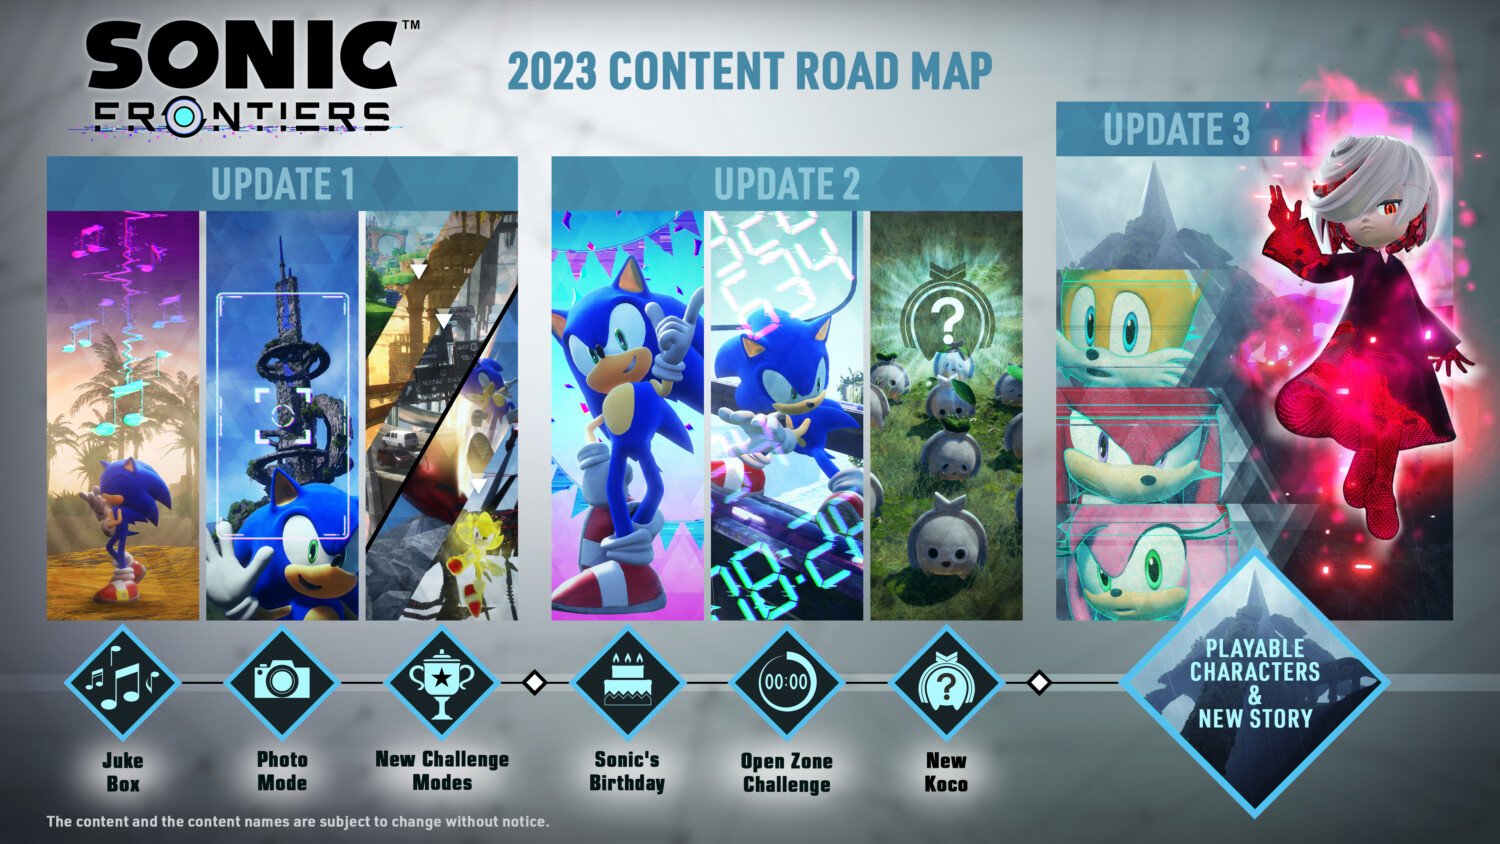 Sonic Frontiers to receive a Monster Hunter collab DLC: Release date and  more